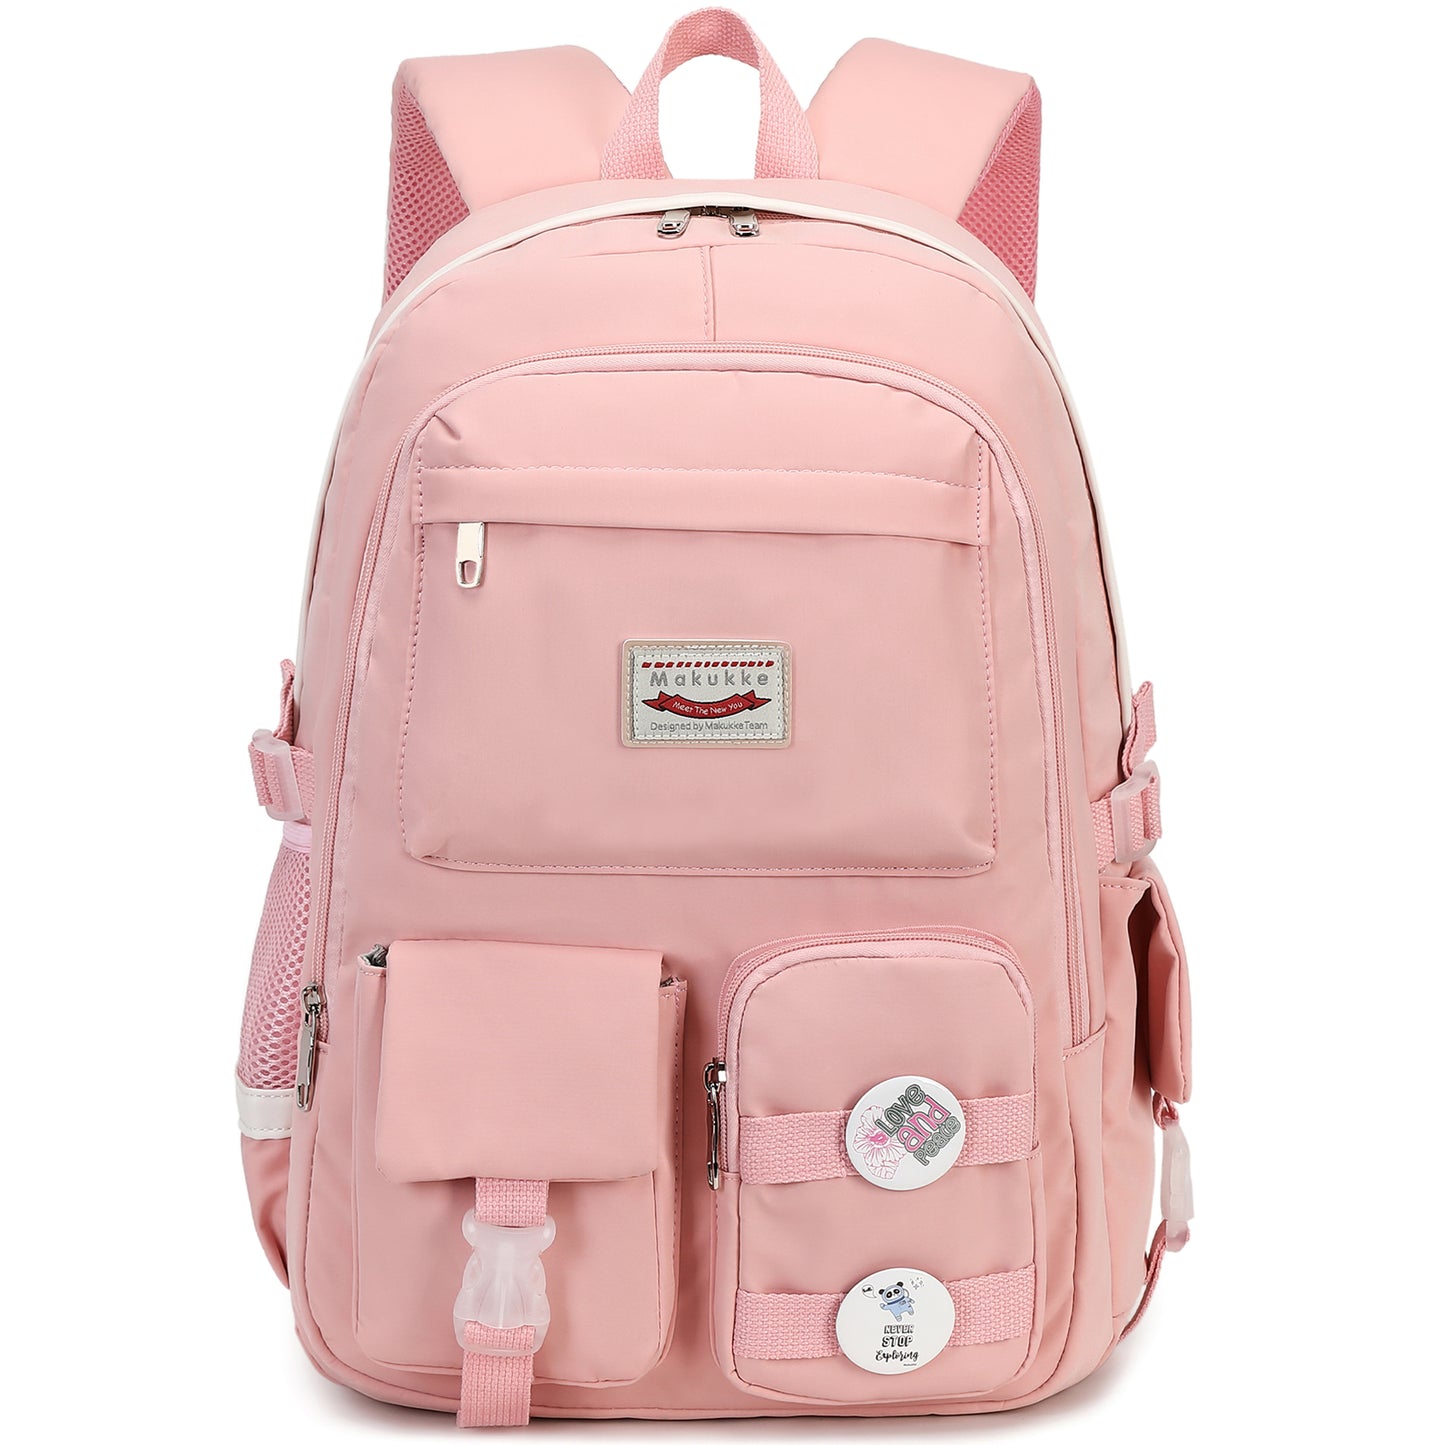 Japanese High School Toddler Backpack For Teenage Girls With Multi Pocket  Design Kawaii Womens Bag 230628 From Pang07, $18.39 | DHgate.Com